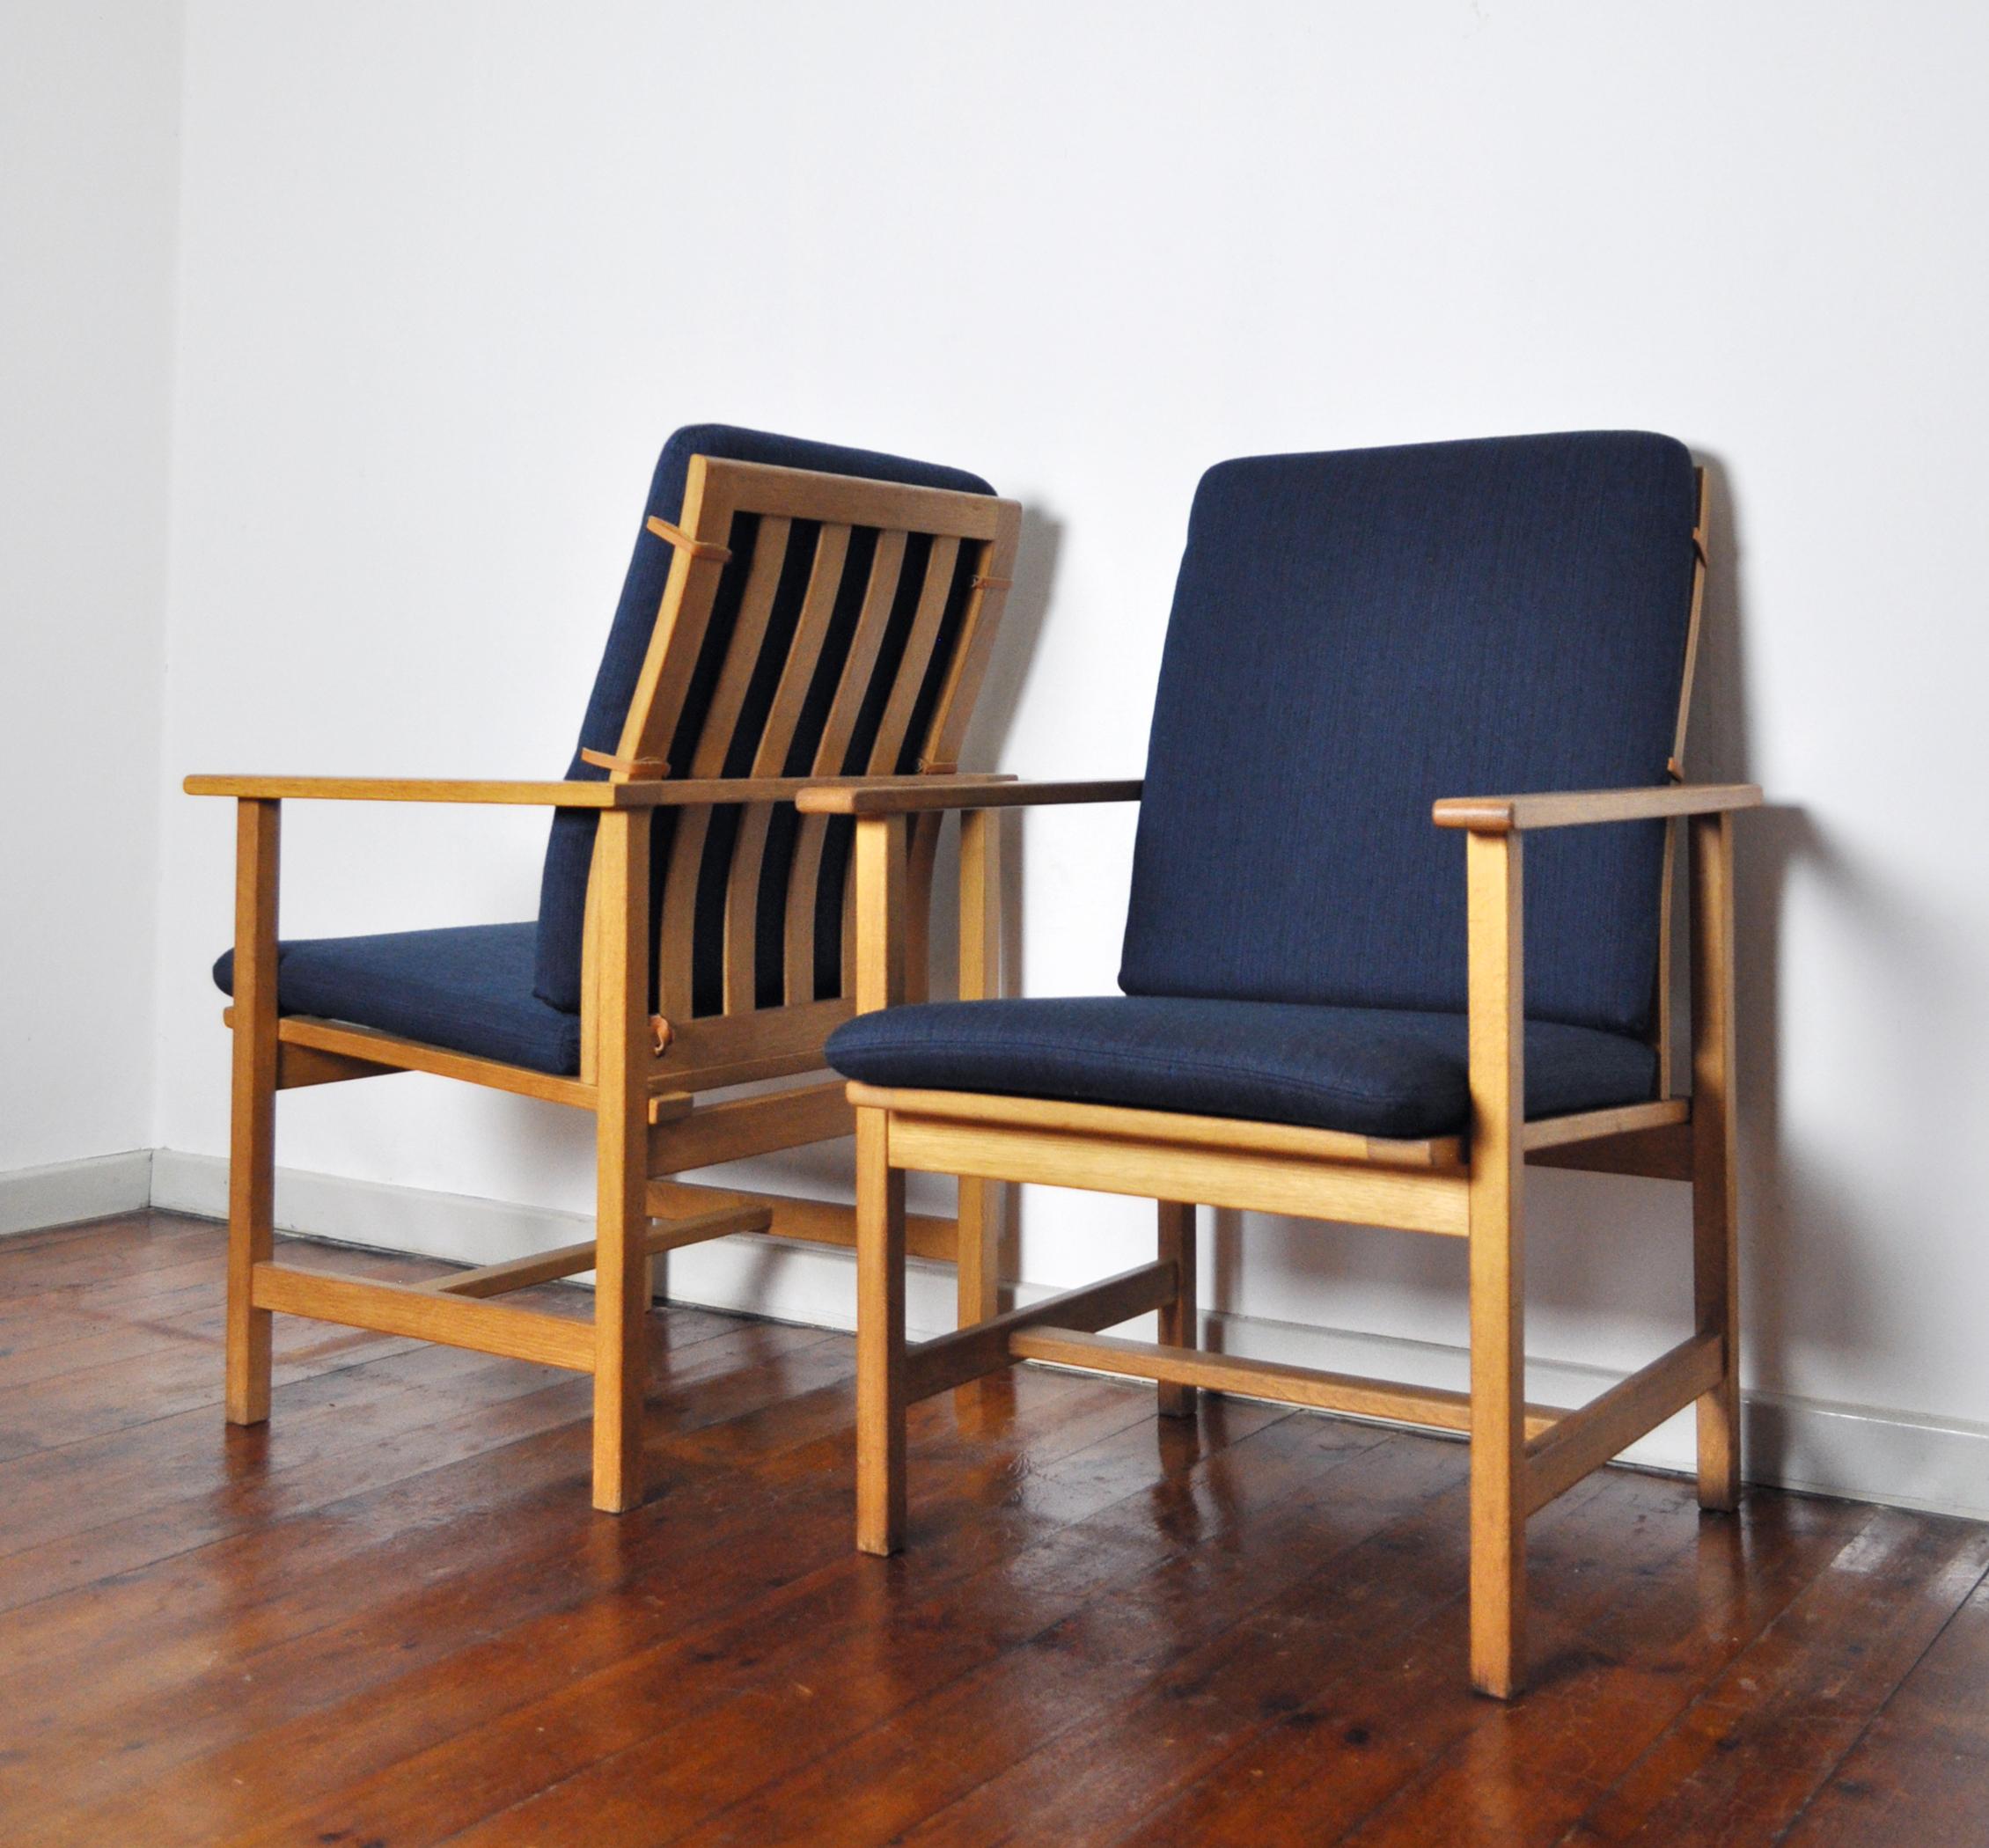 Danish Modern Oak Armchairs with Navy Blue New Upholstery by Børge Mogensen For Sale 2